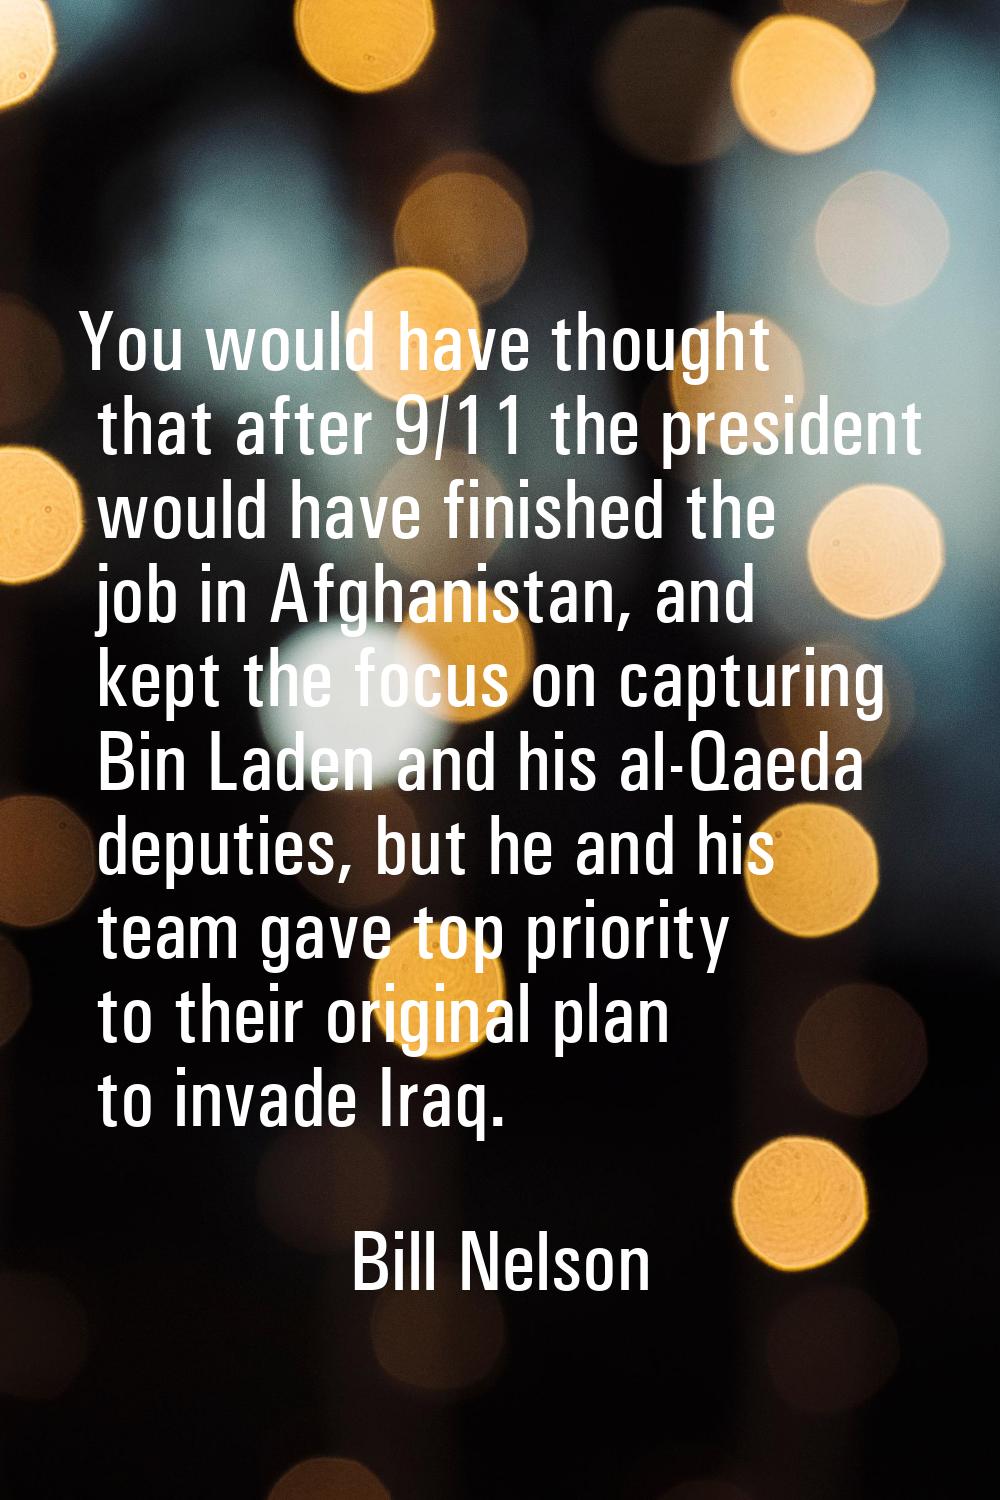 You would have thought that after 9/11 the president would have finished the job in Afghanistan, an